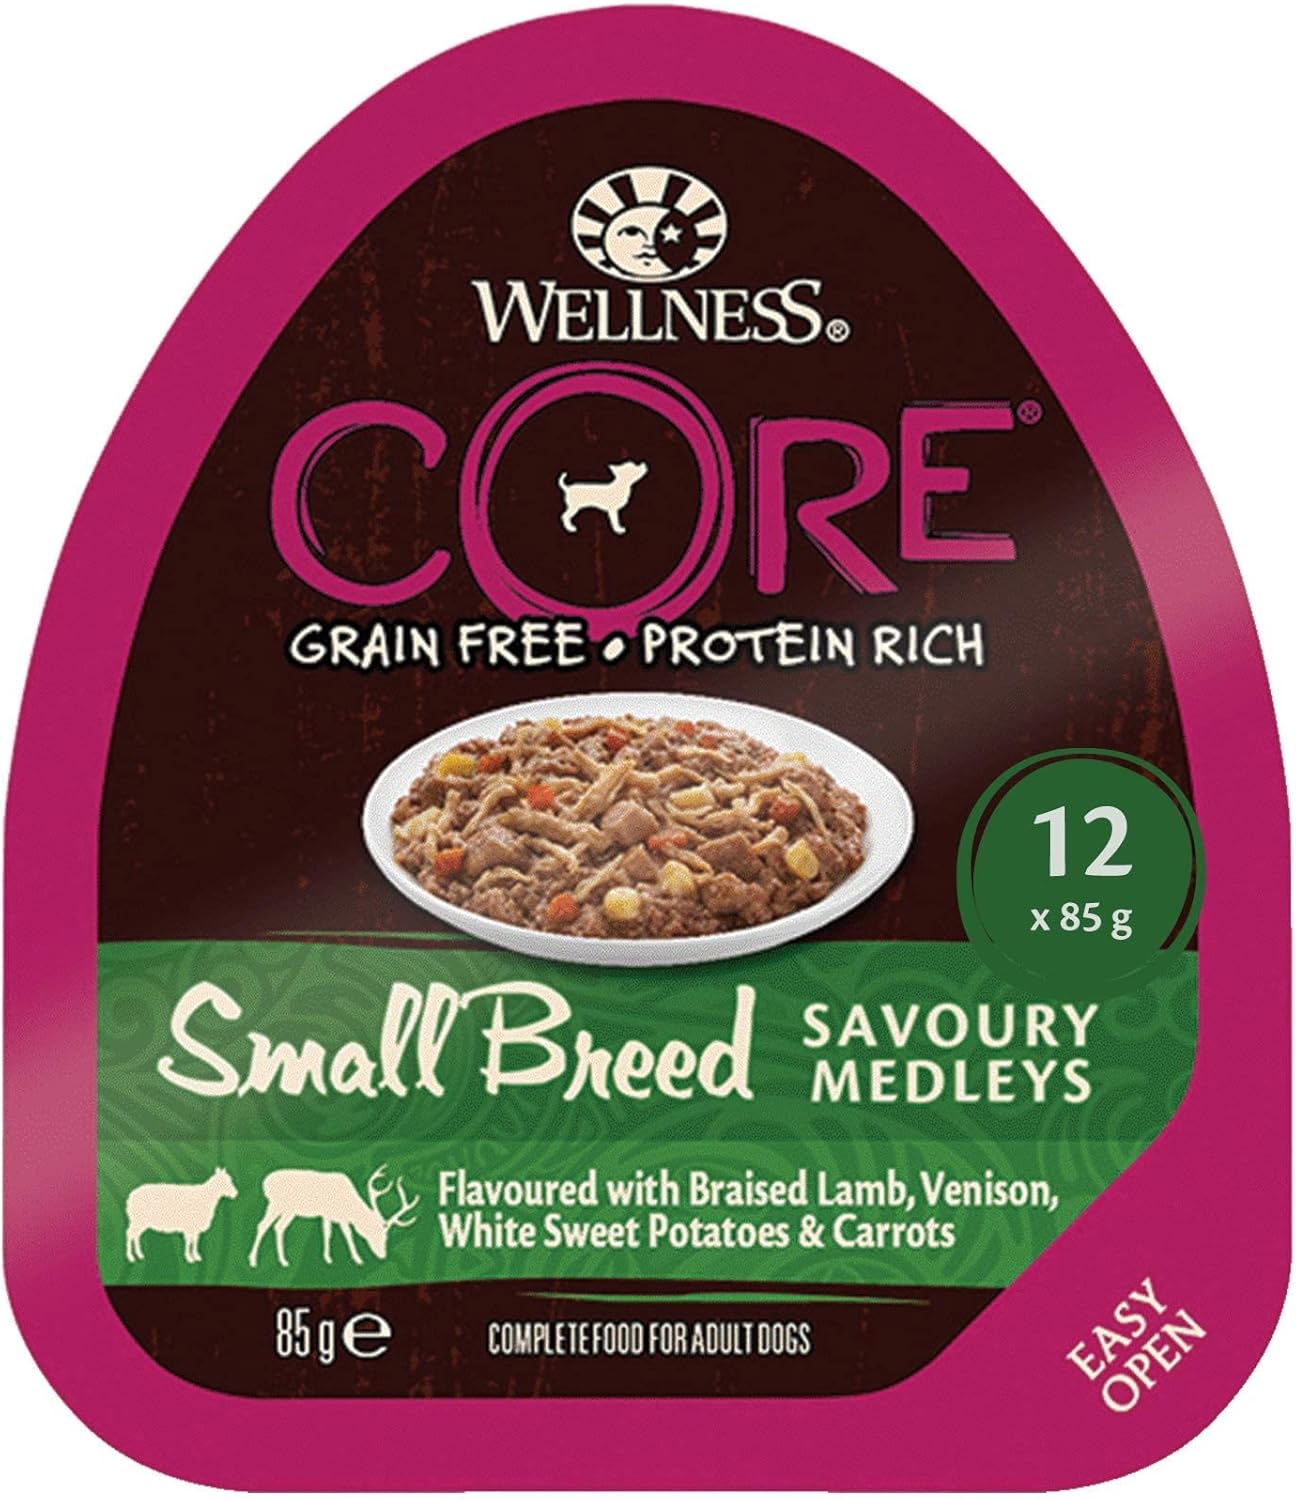 Wellness CORE Small Breed Savoury Medleys, Dog Food Wet for Smaller Breed, Grain Free, High Meat Content, Lamb and Venison, 85 g (Pack of 12)?10456